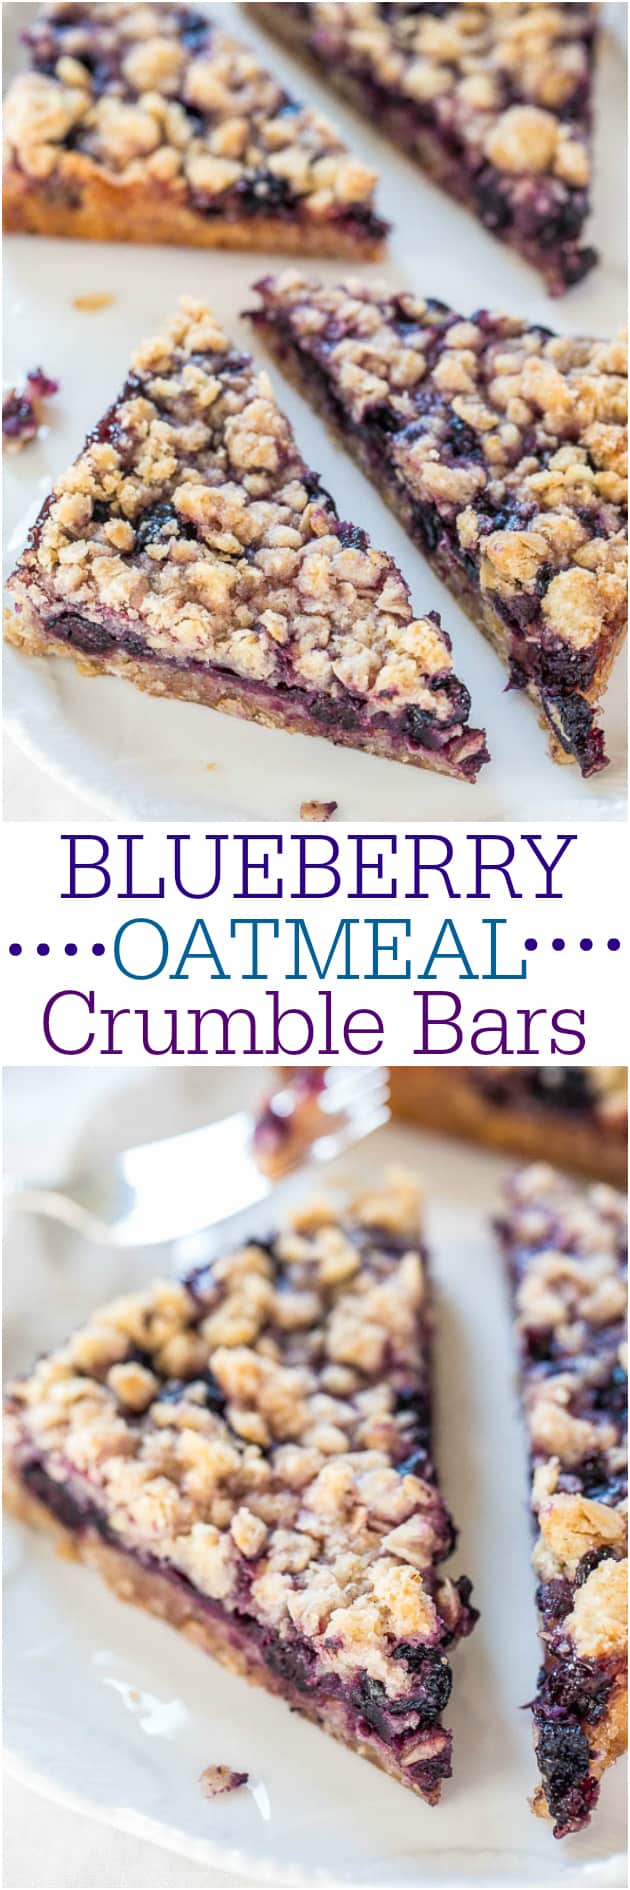 Blueberry Oatmeal Crumble Bars - Fast, easy, no-mixer bars great for breakfast, snacks, or a healthy dessert! BIG crumbles and juicy berries are irresistible!!